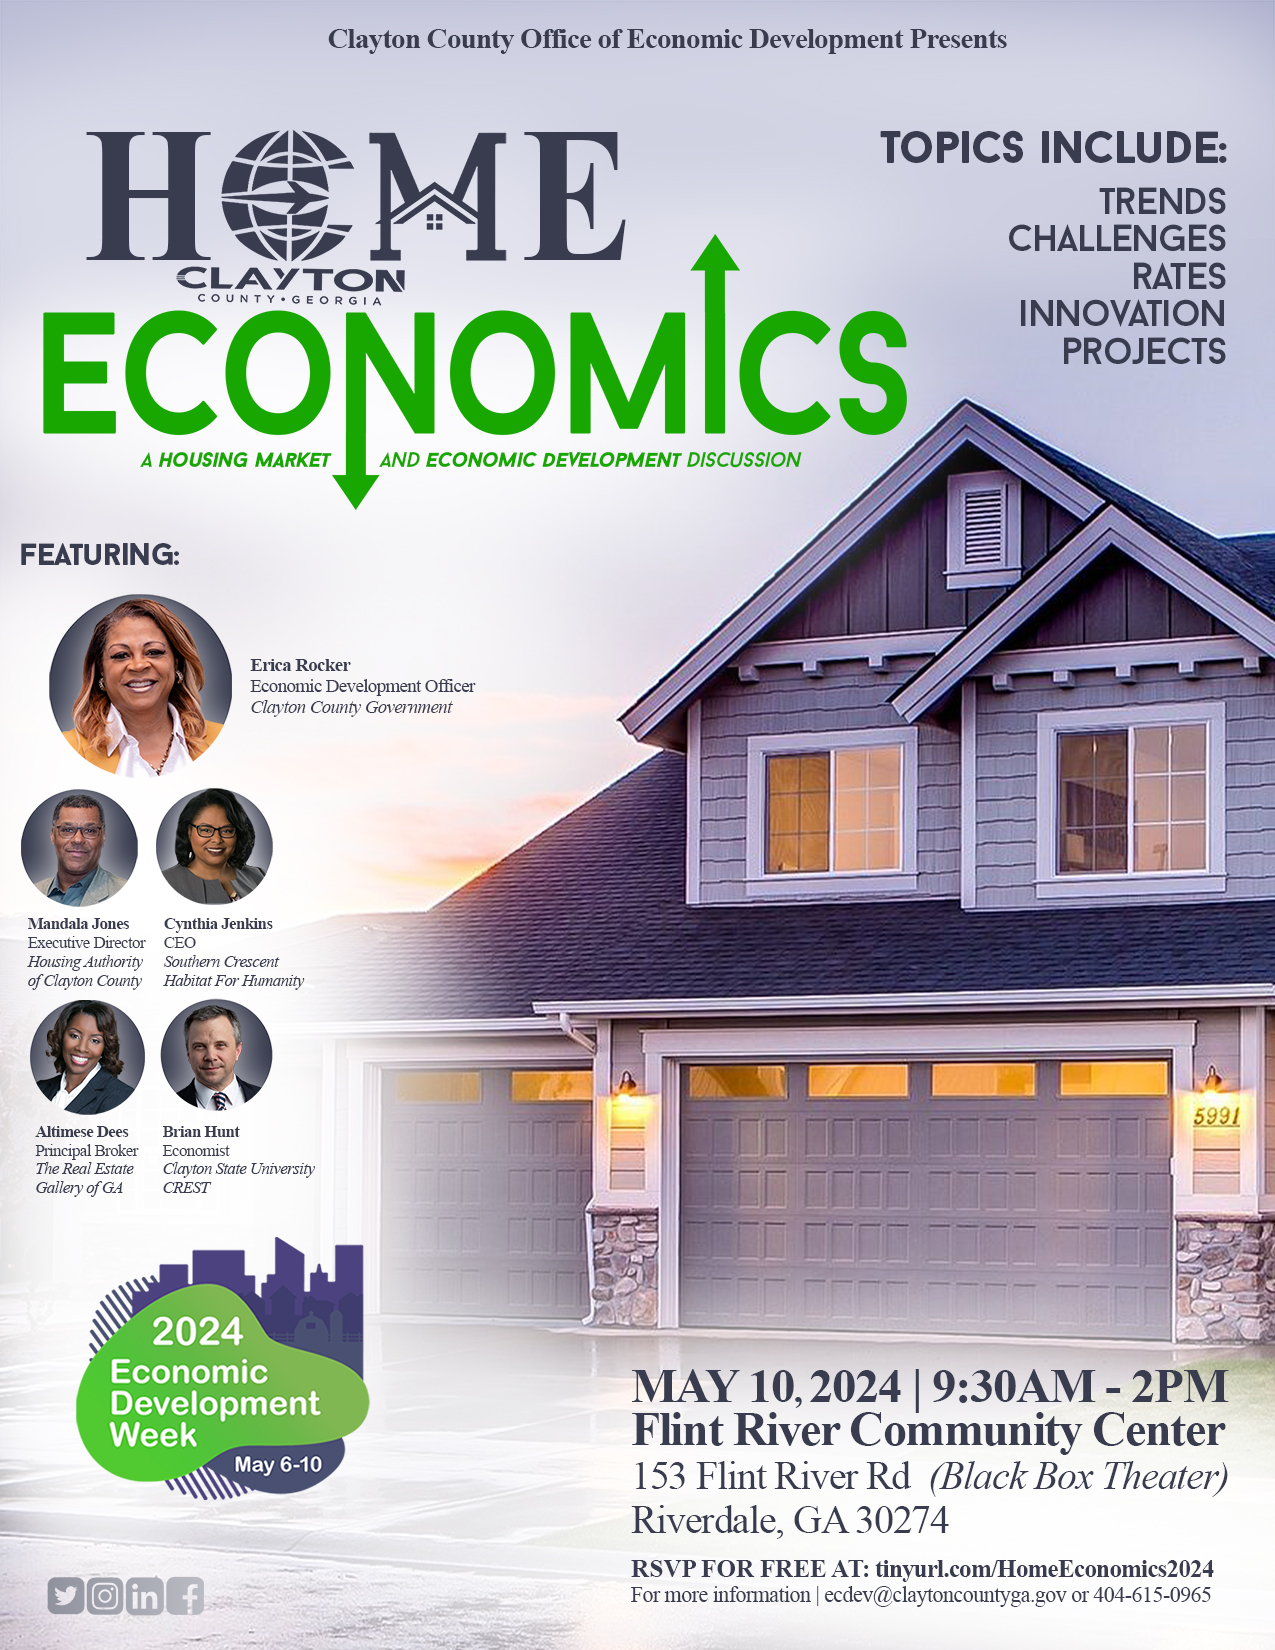 Economic Development Flyer. All information from this flyer is listed below.